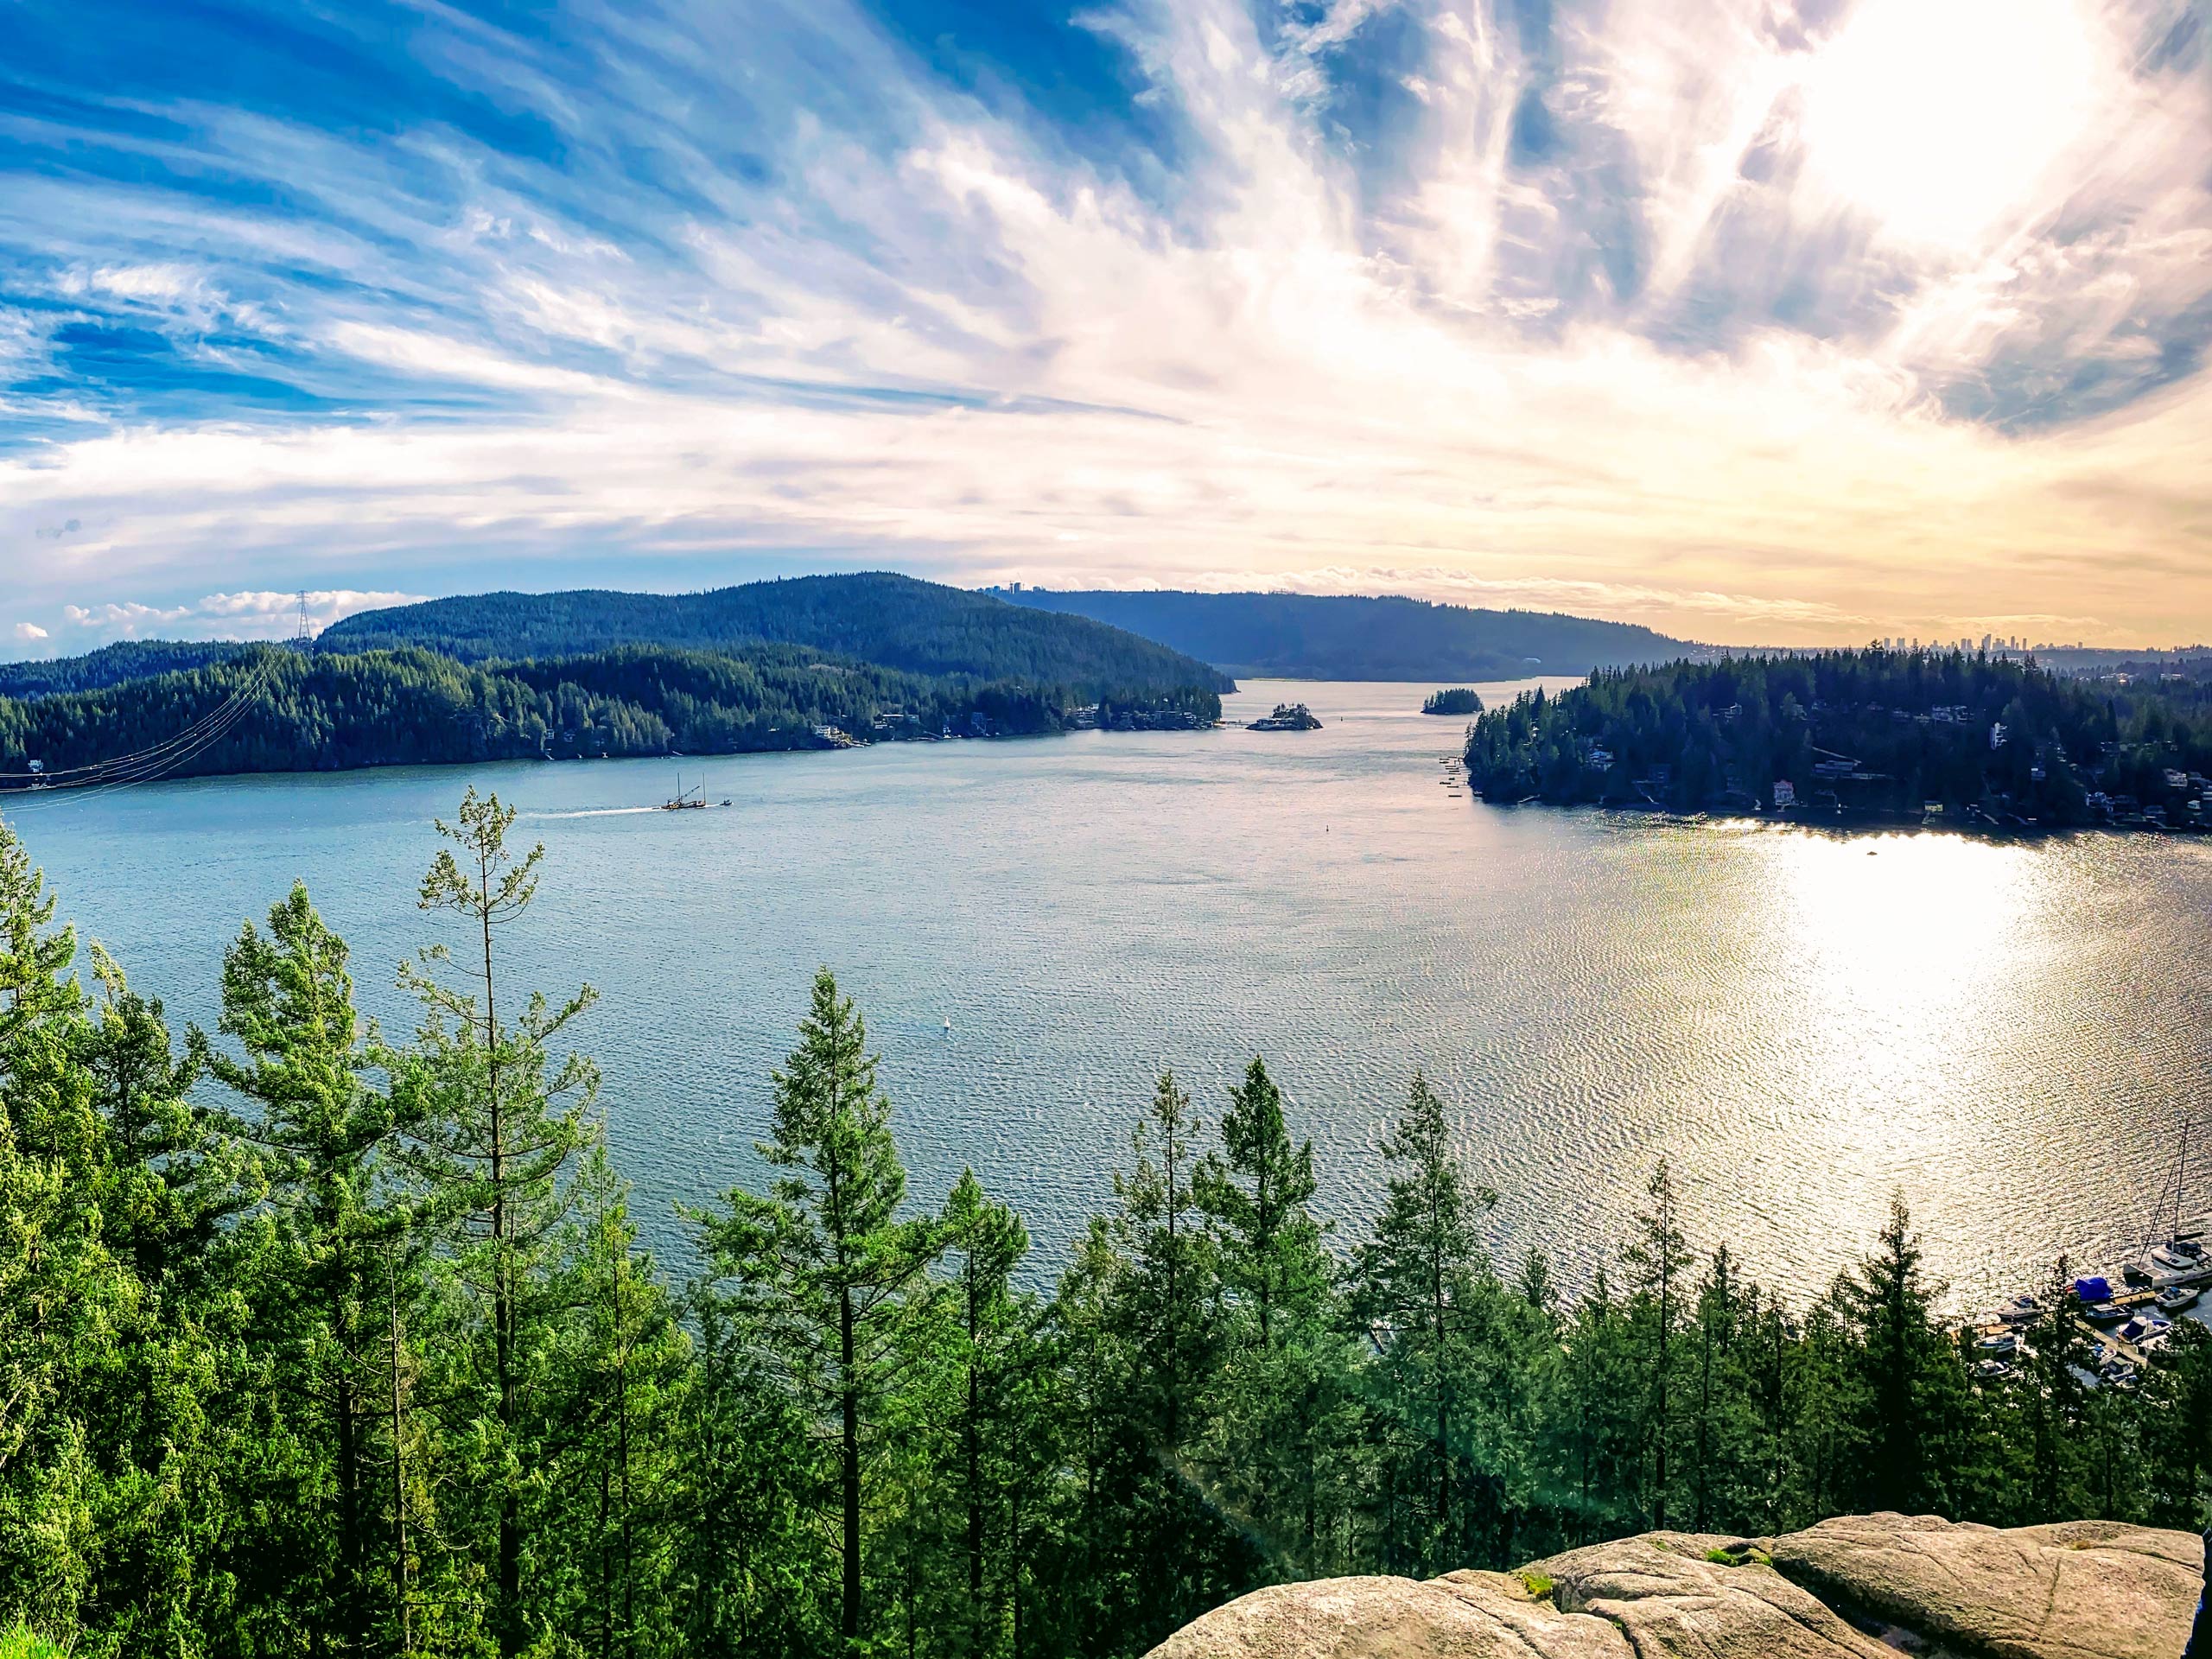 Quarry Rock Hike from Deep Cove